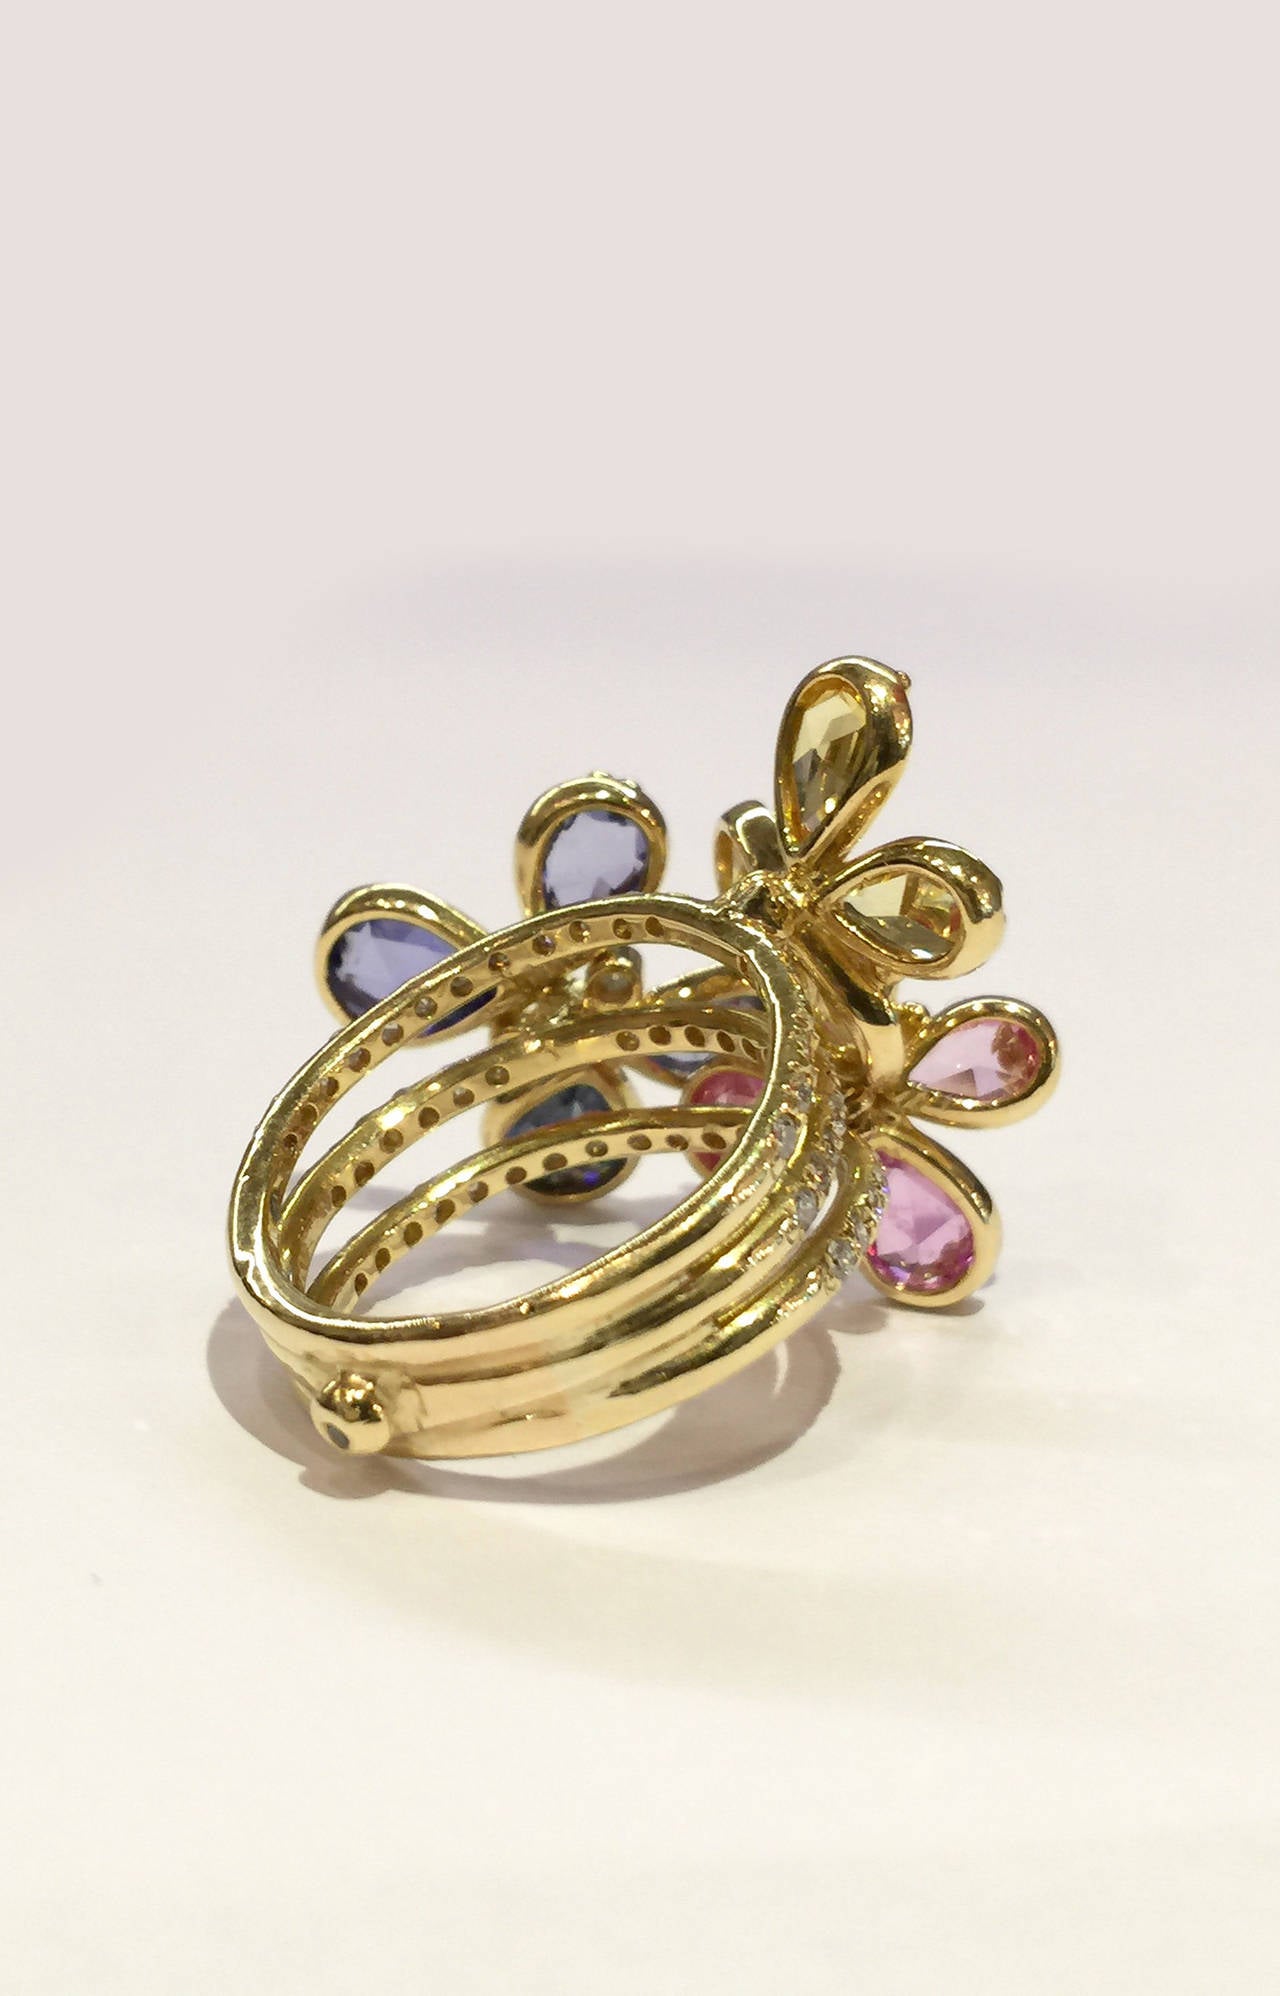 Multi-color sapphire yellow gold ring signed by Temple St Clair. 
Three butterflies set with blue, pink and yellow sapphires.
The three branches of the mounting are set with brilliant-cut diamonds.
Weight : 12.6 grams.
Circa 2008
Size : 7,5